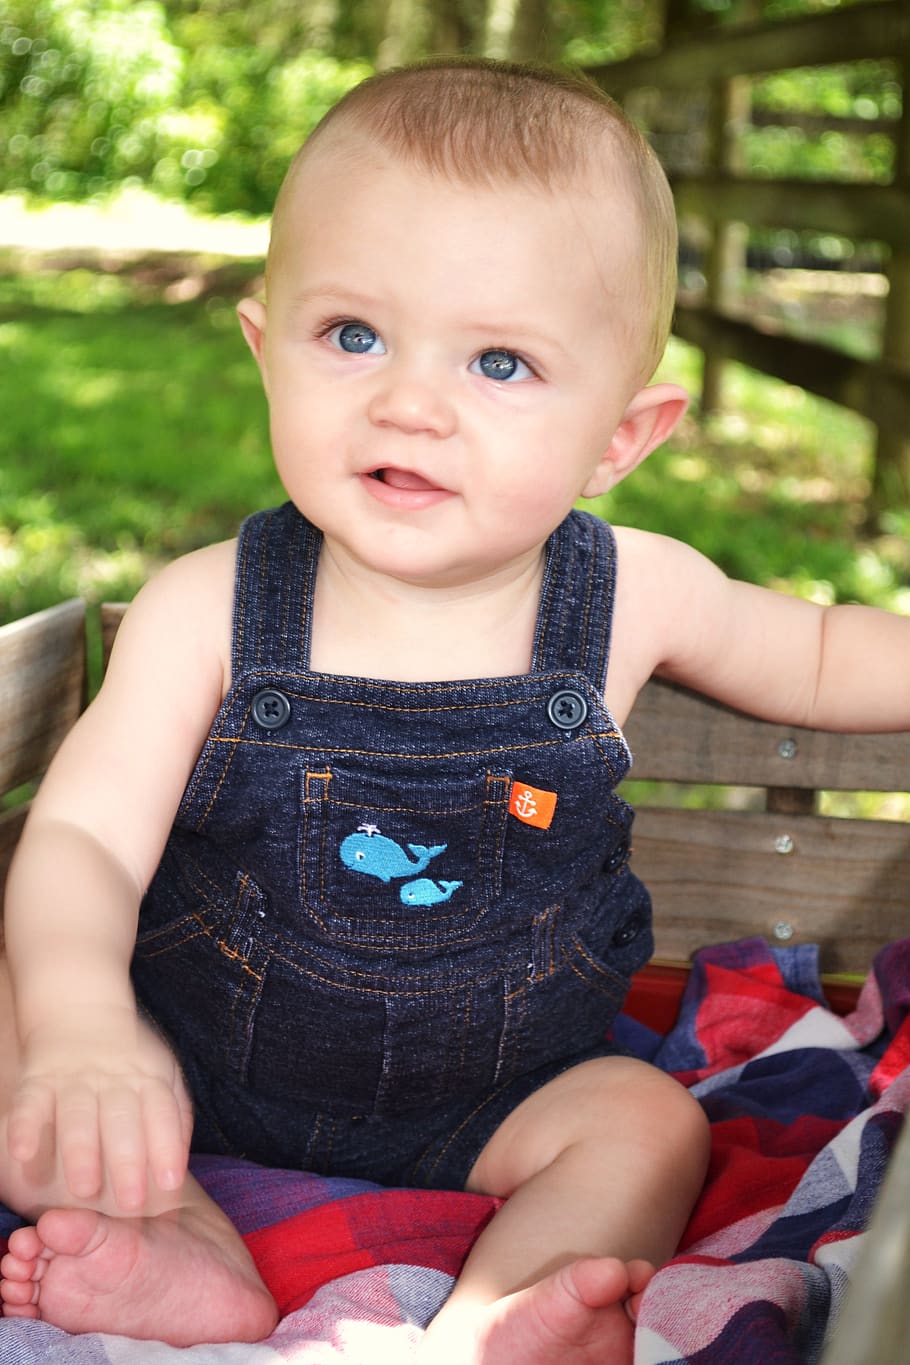 HD wallpaper: baby blues, blue eyes, 6 months, cute, overalls, farmer babe  | Wallpaper Flare